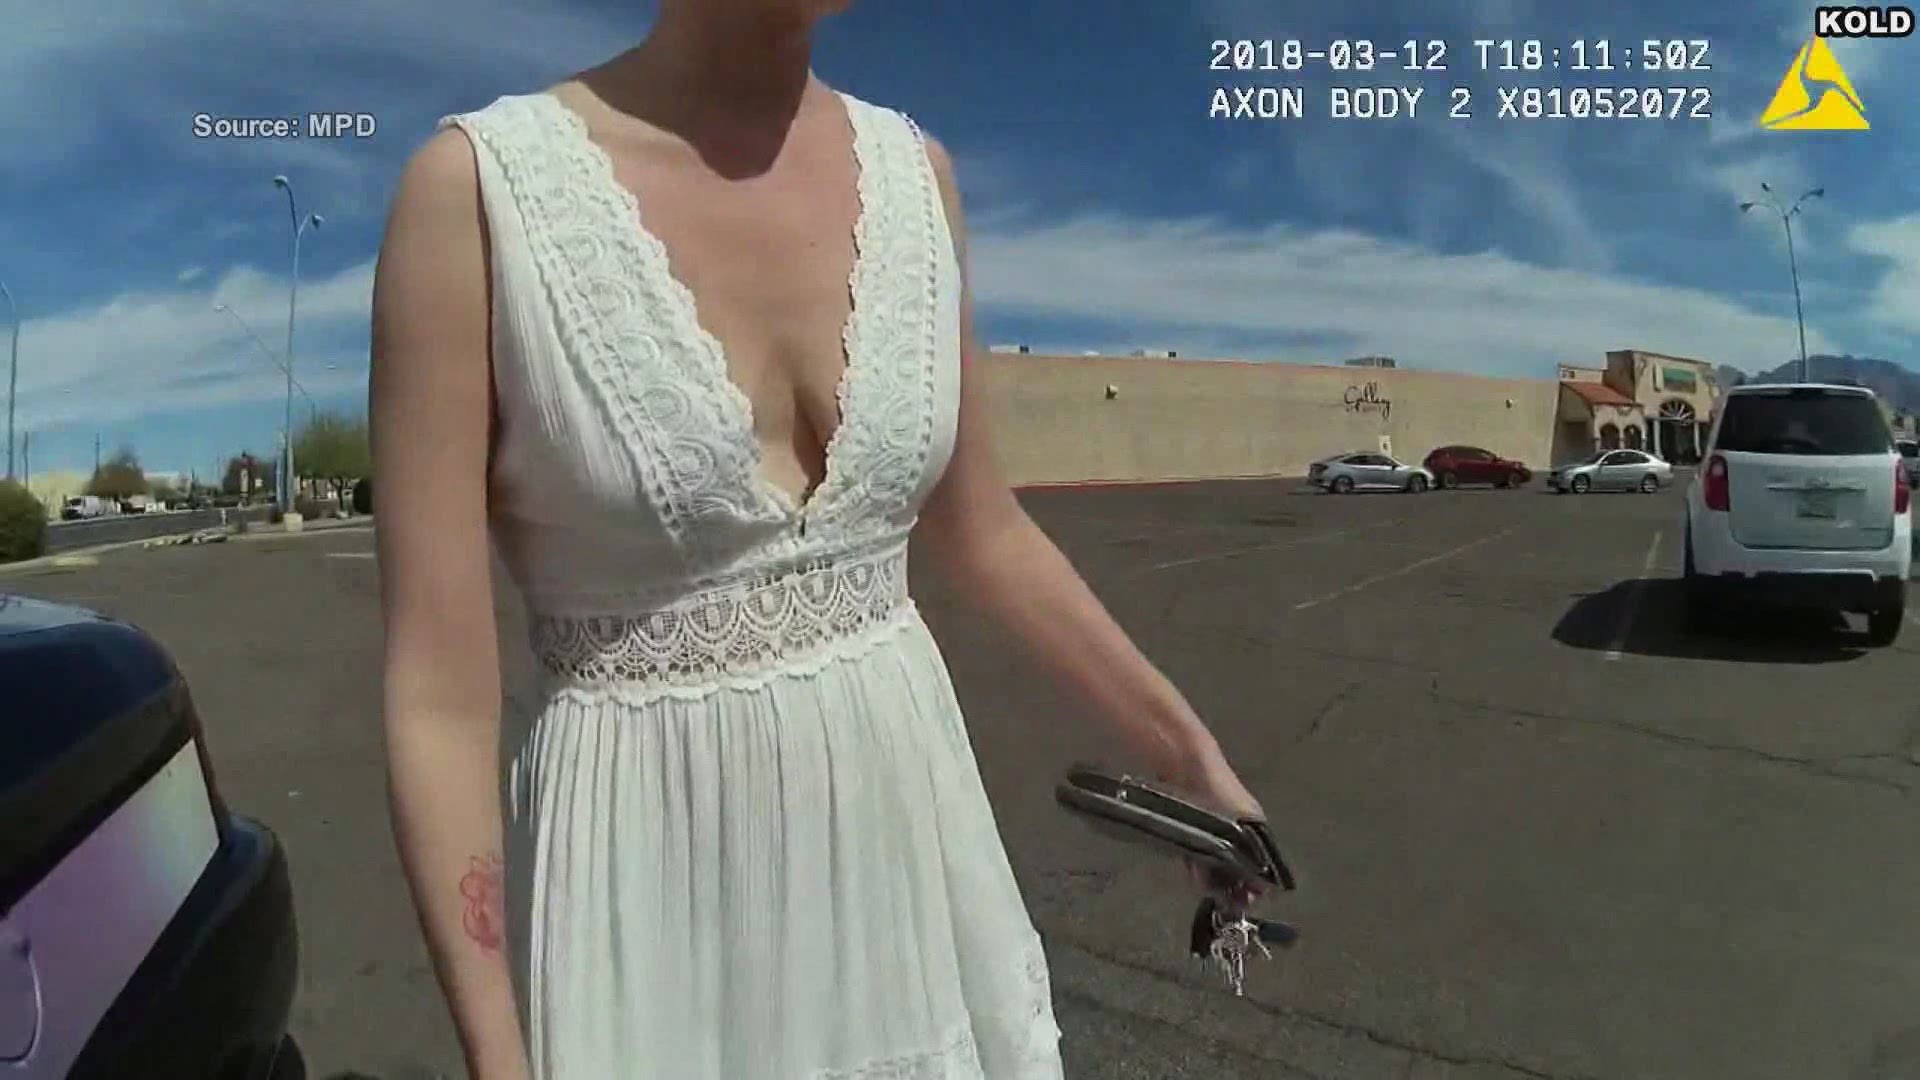 A bride told police she had one drink following a crash on the way to her wedding. She was charged with impaired driving.